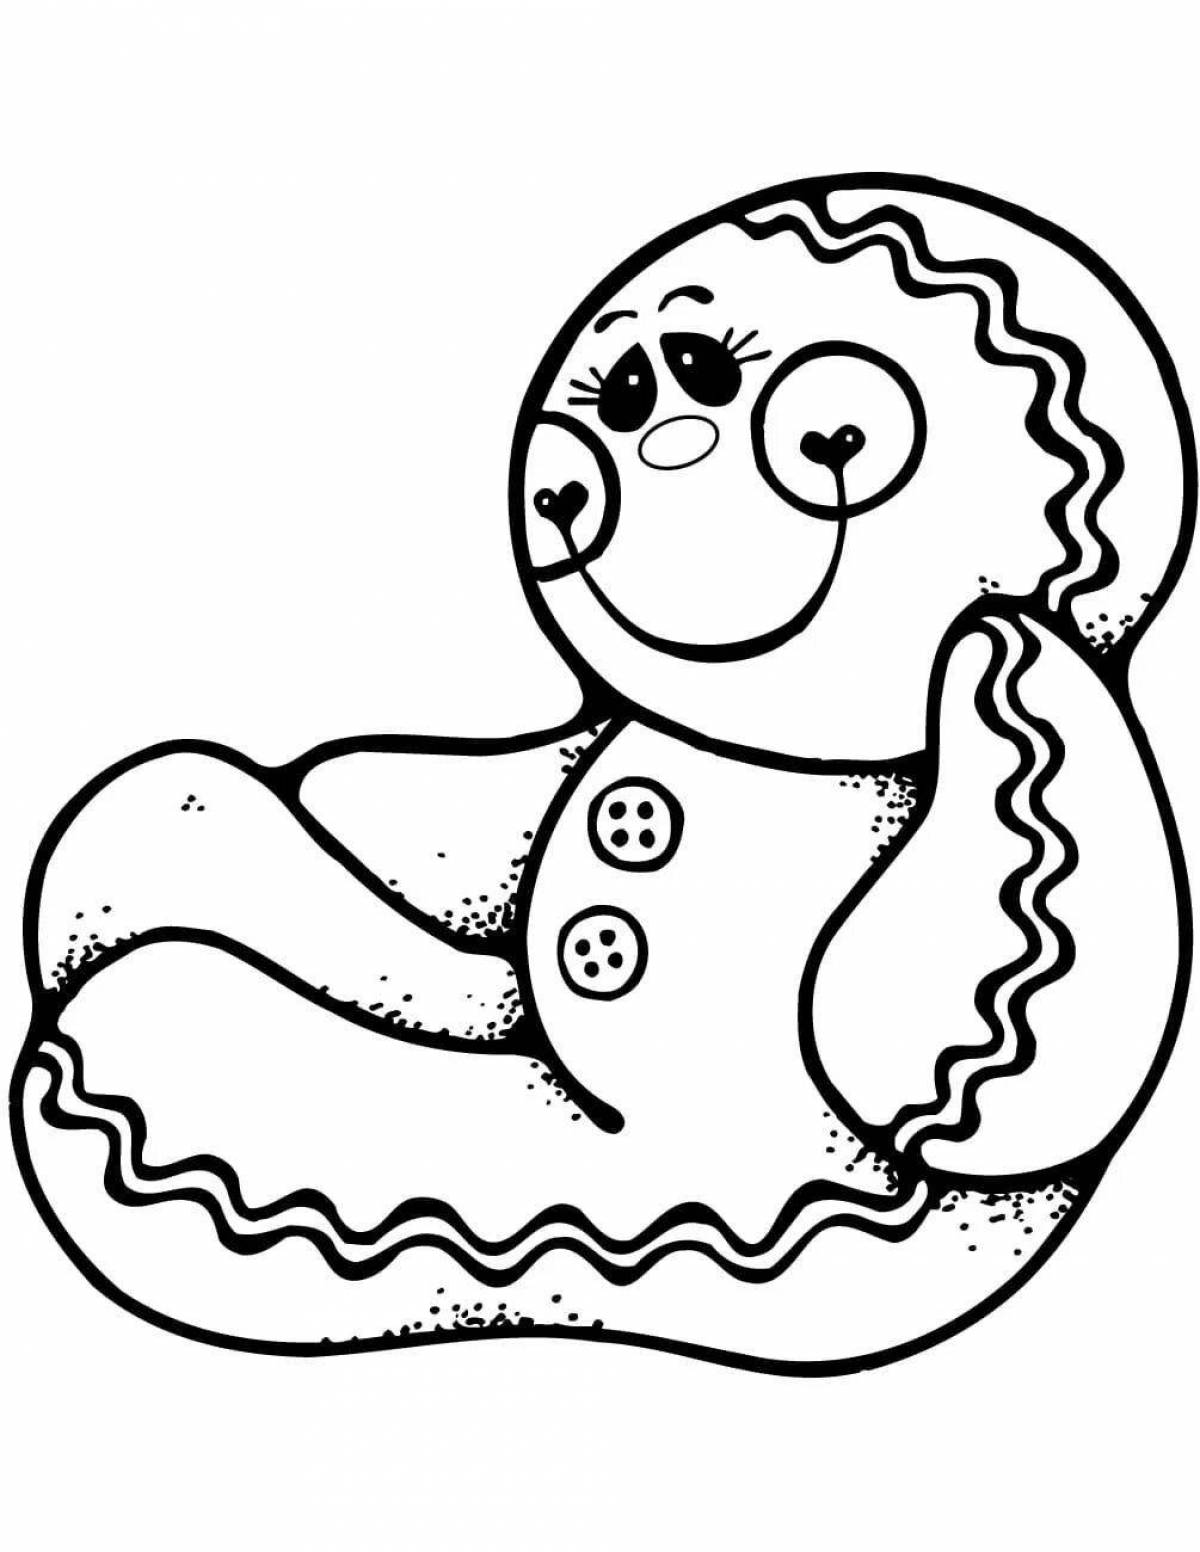 Coloring page festive Tula gingerbread